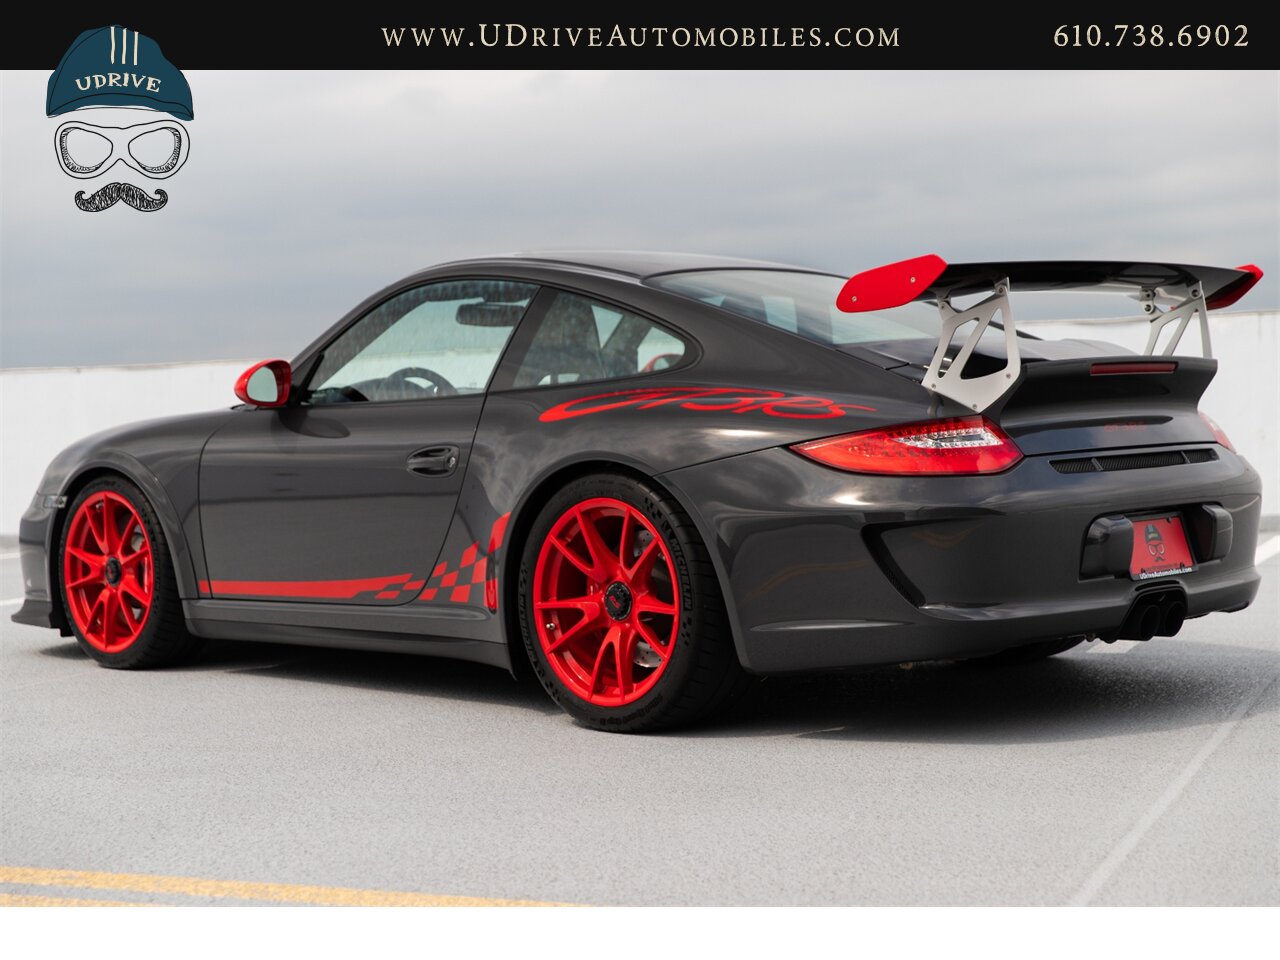 2010 Porsche 911 GT3 RS 1k Miles Dev Red Stitching Throughout  Front Axle Lift Sport Chrono 997.2 - Photo 31 - West Chester, PA 19382